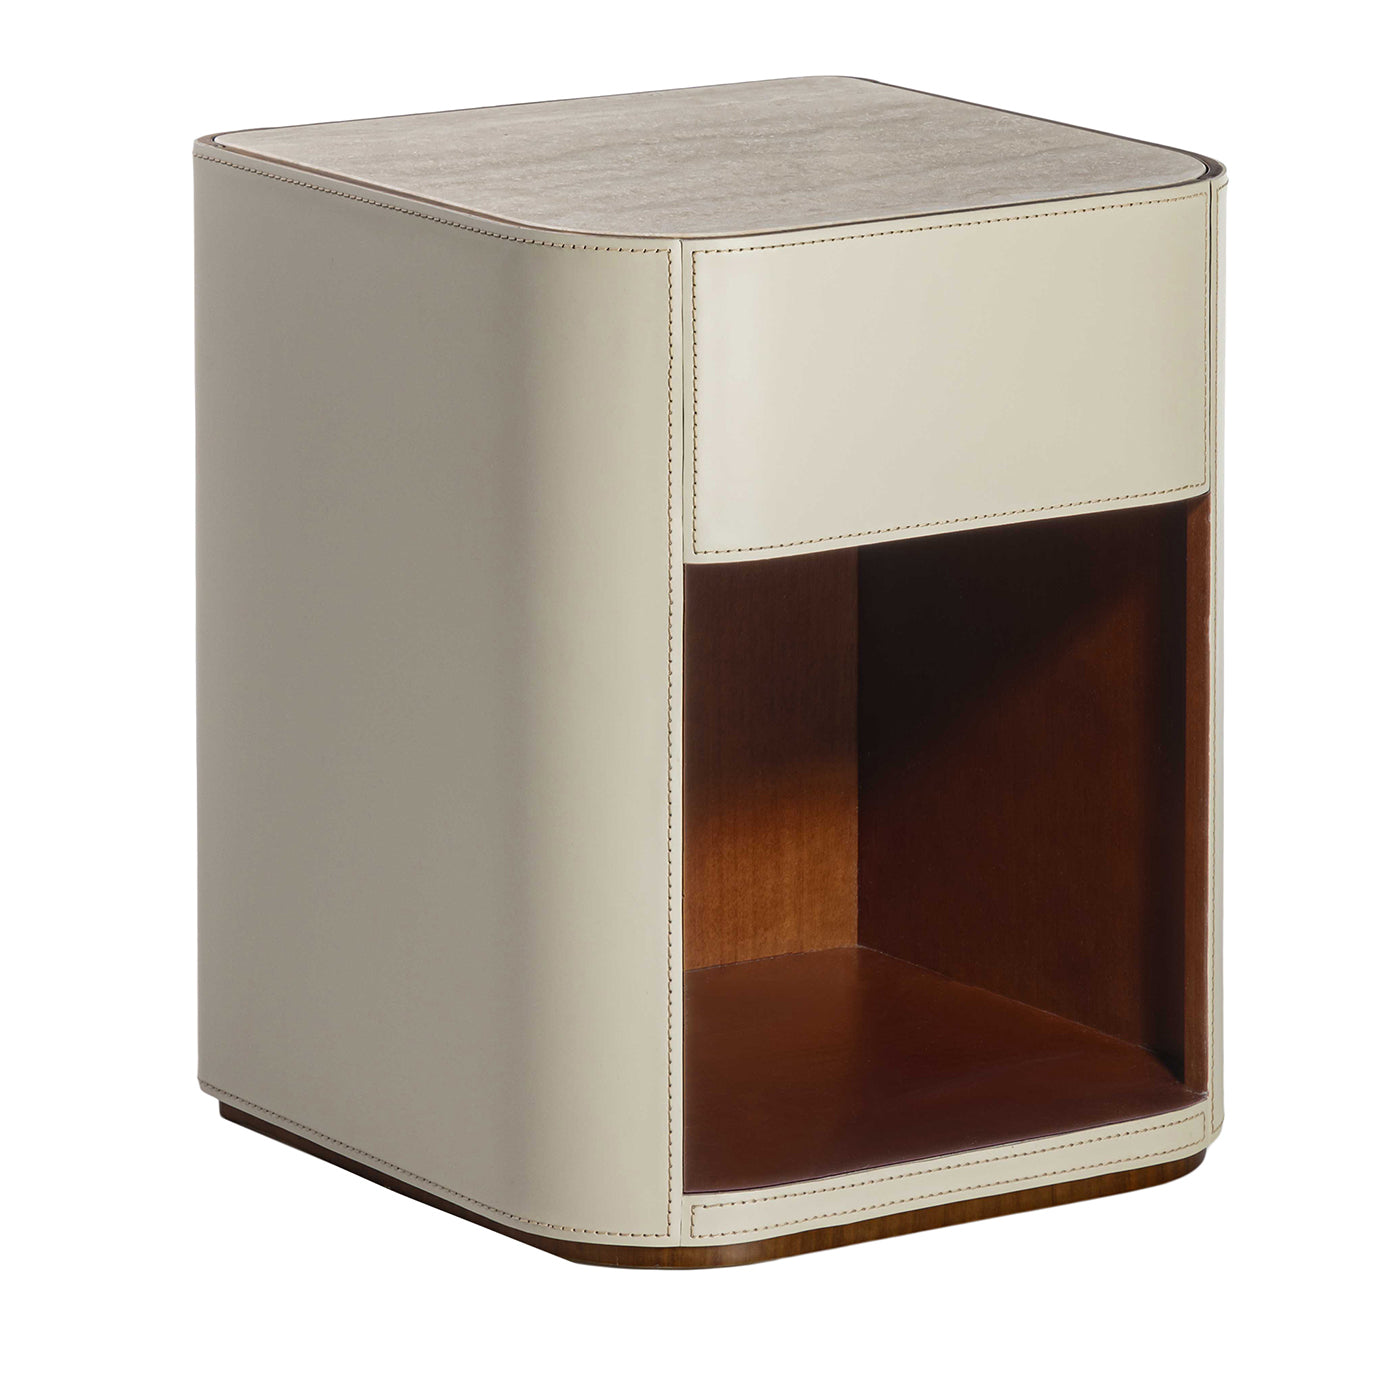 Alma 1-Drawer Beige Leather Nightstand with Travertine Marble Top - Main view